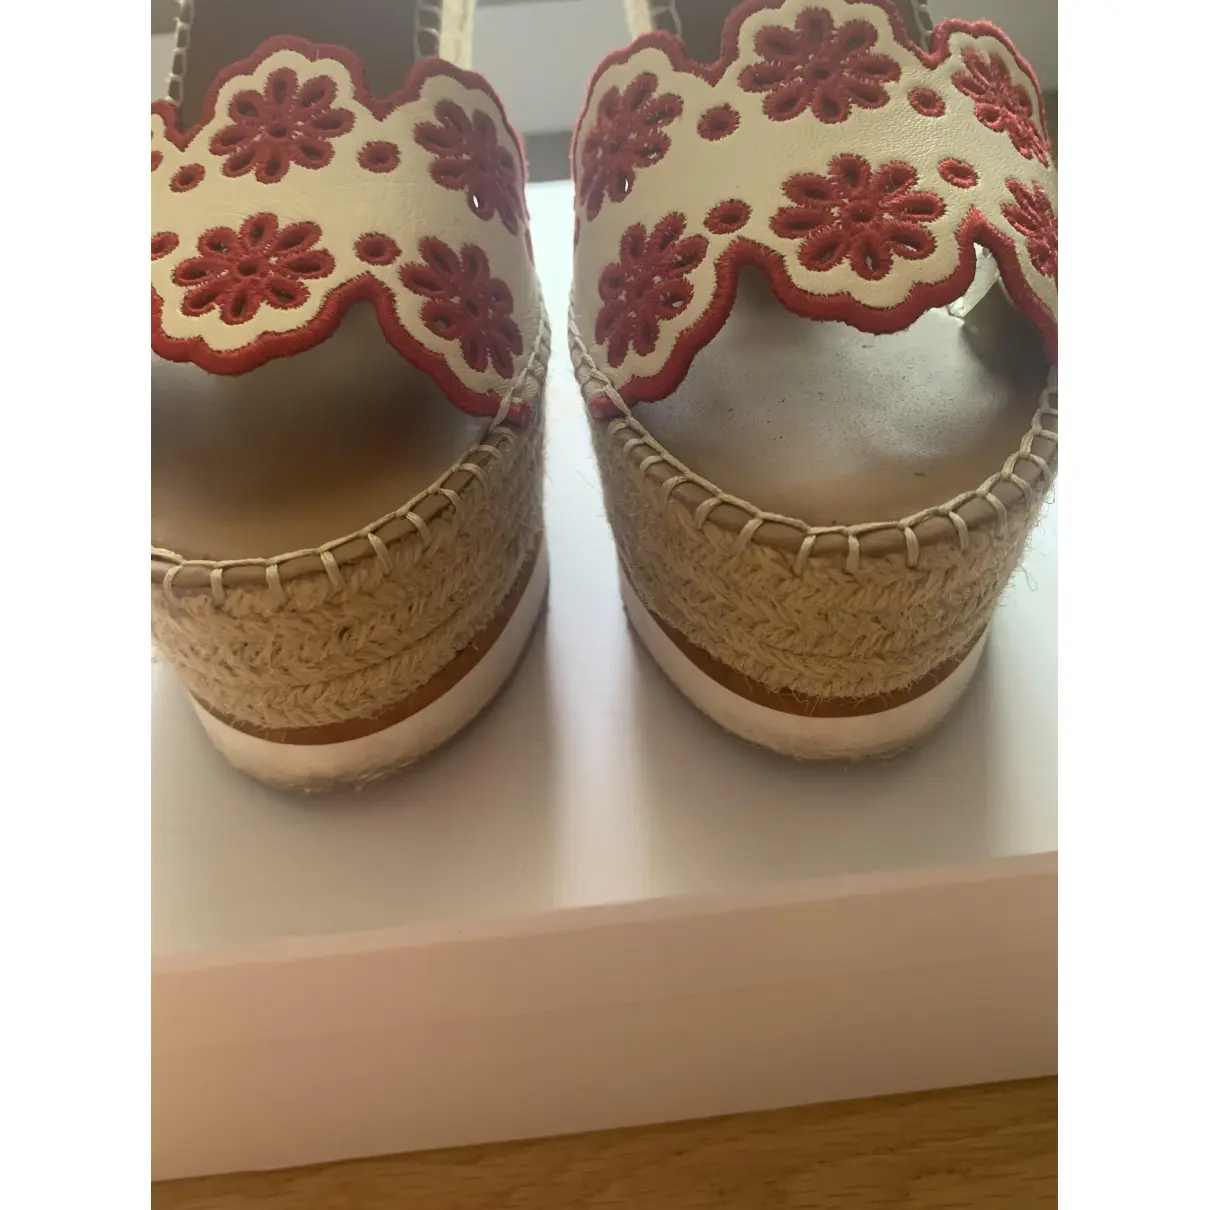 Buy See by Chloé Leather espadrilles online